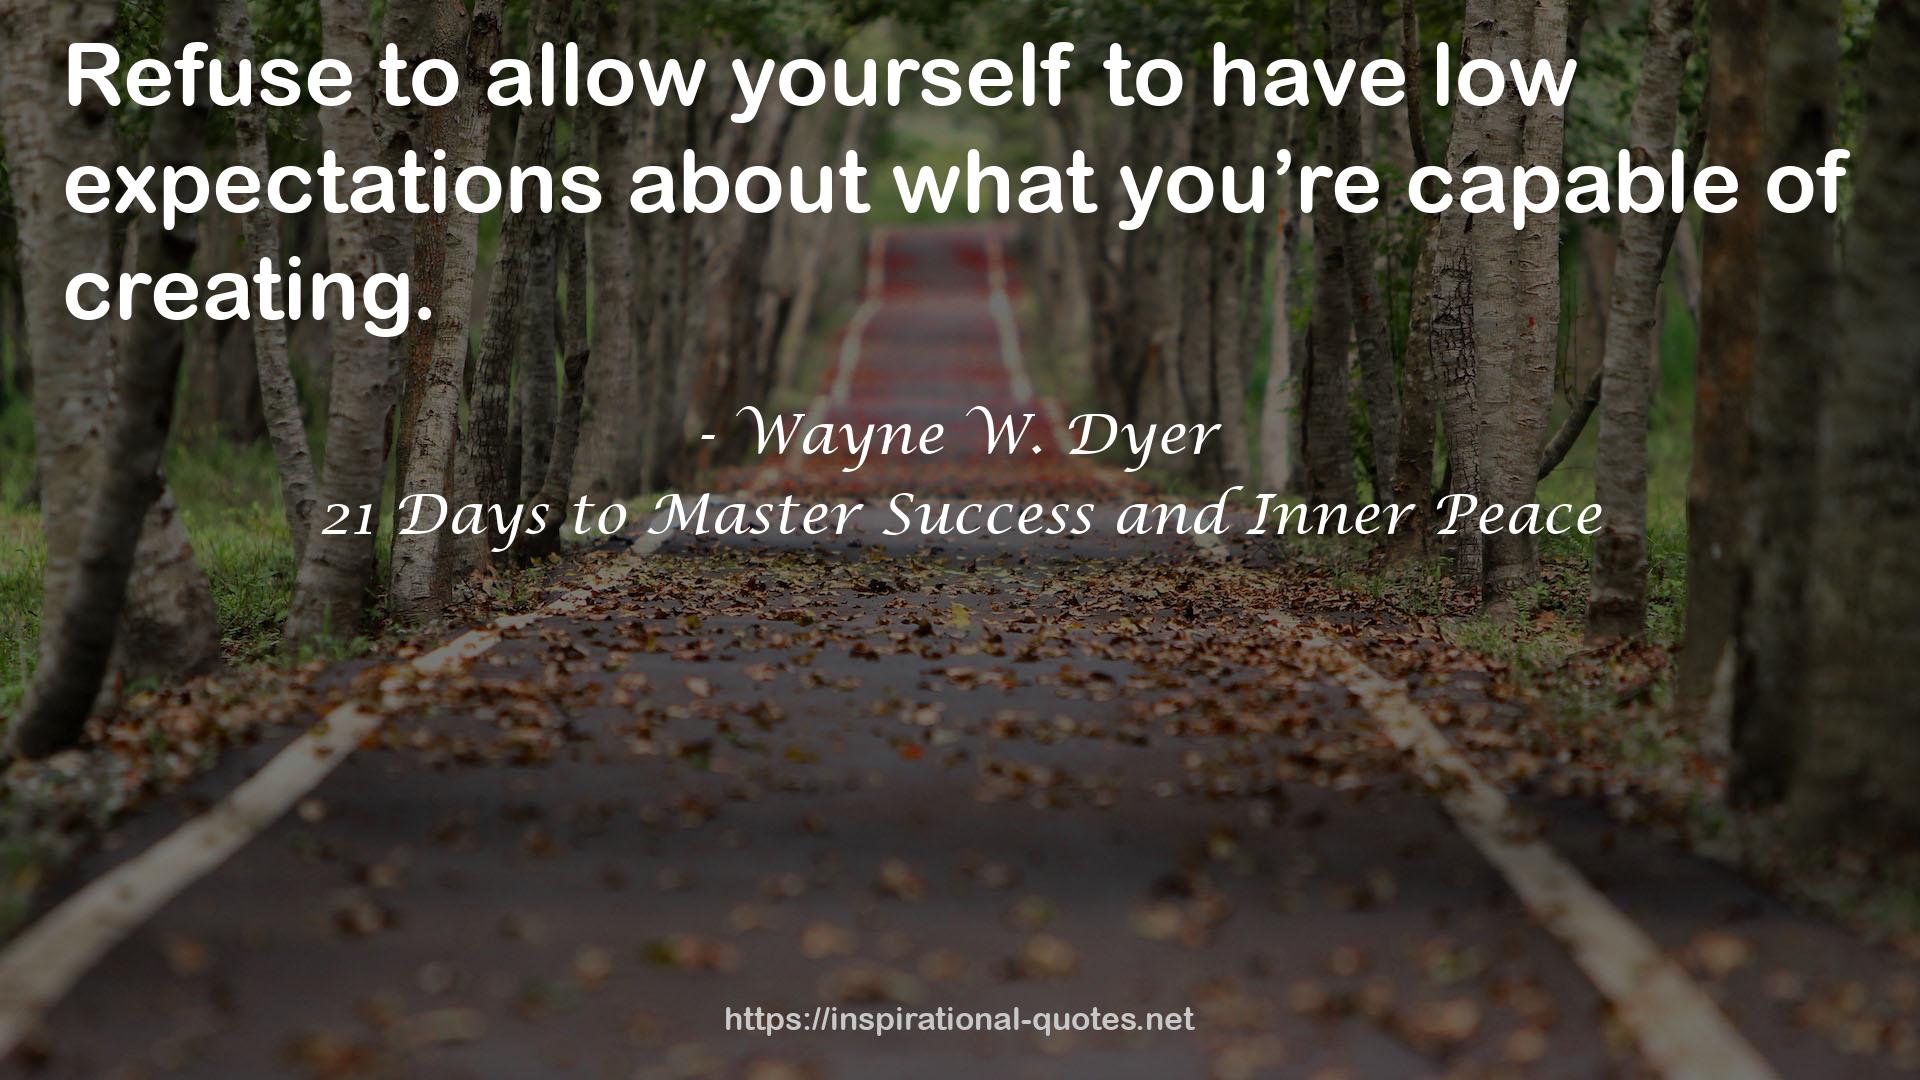 21 Days to Master Success and Inner Peace QUOTES